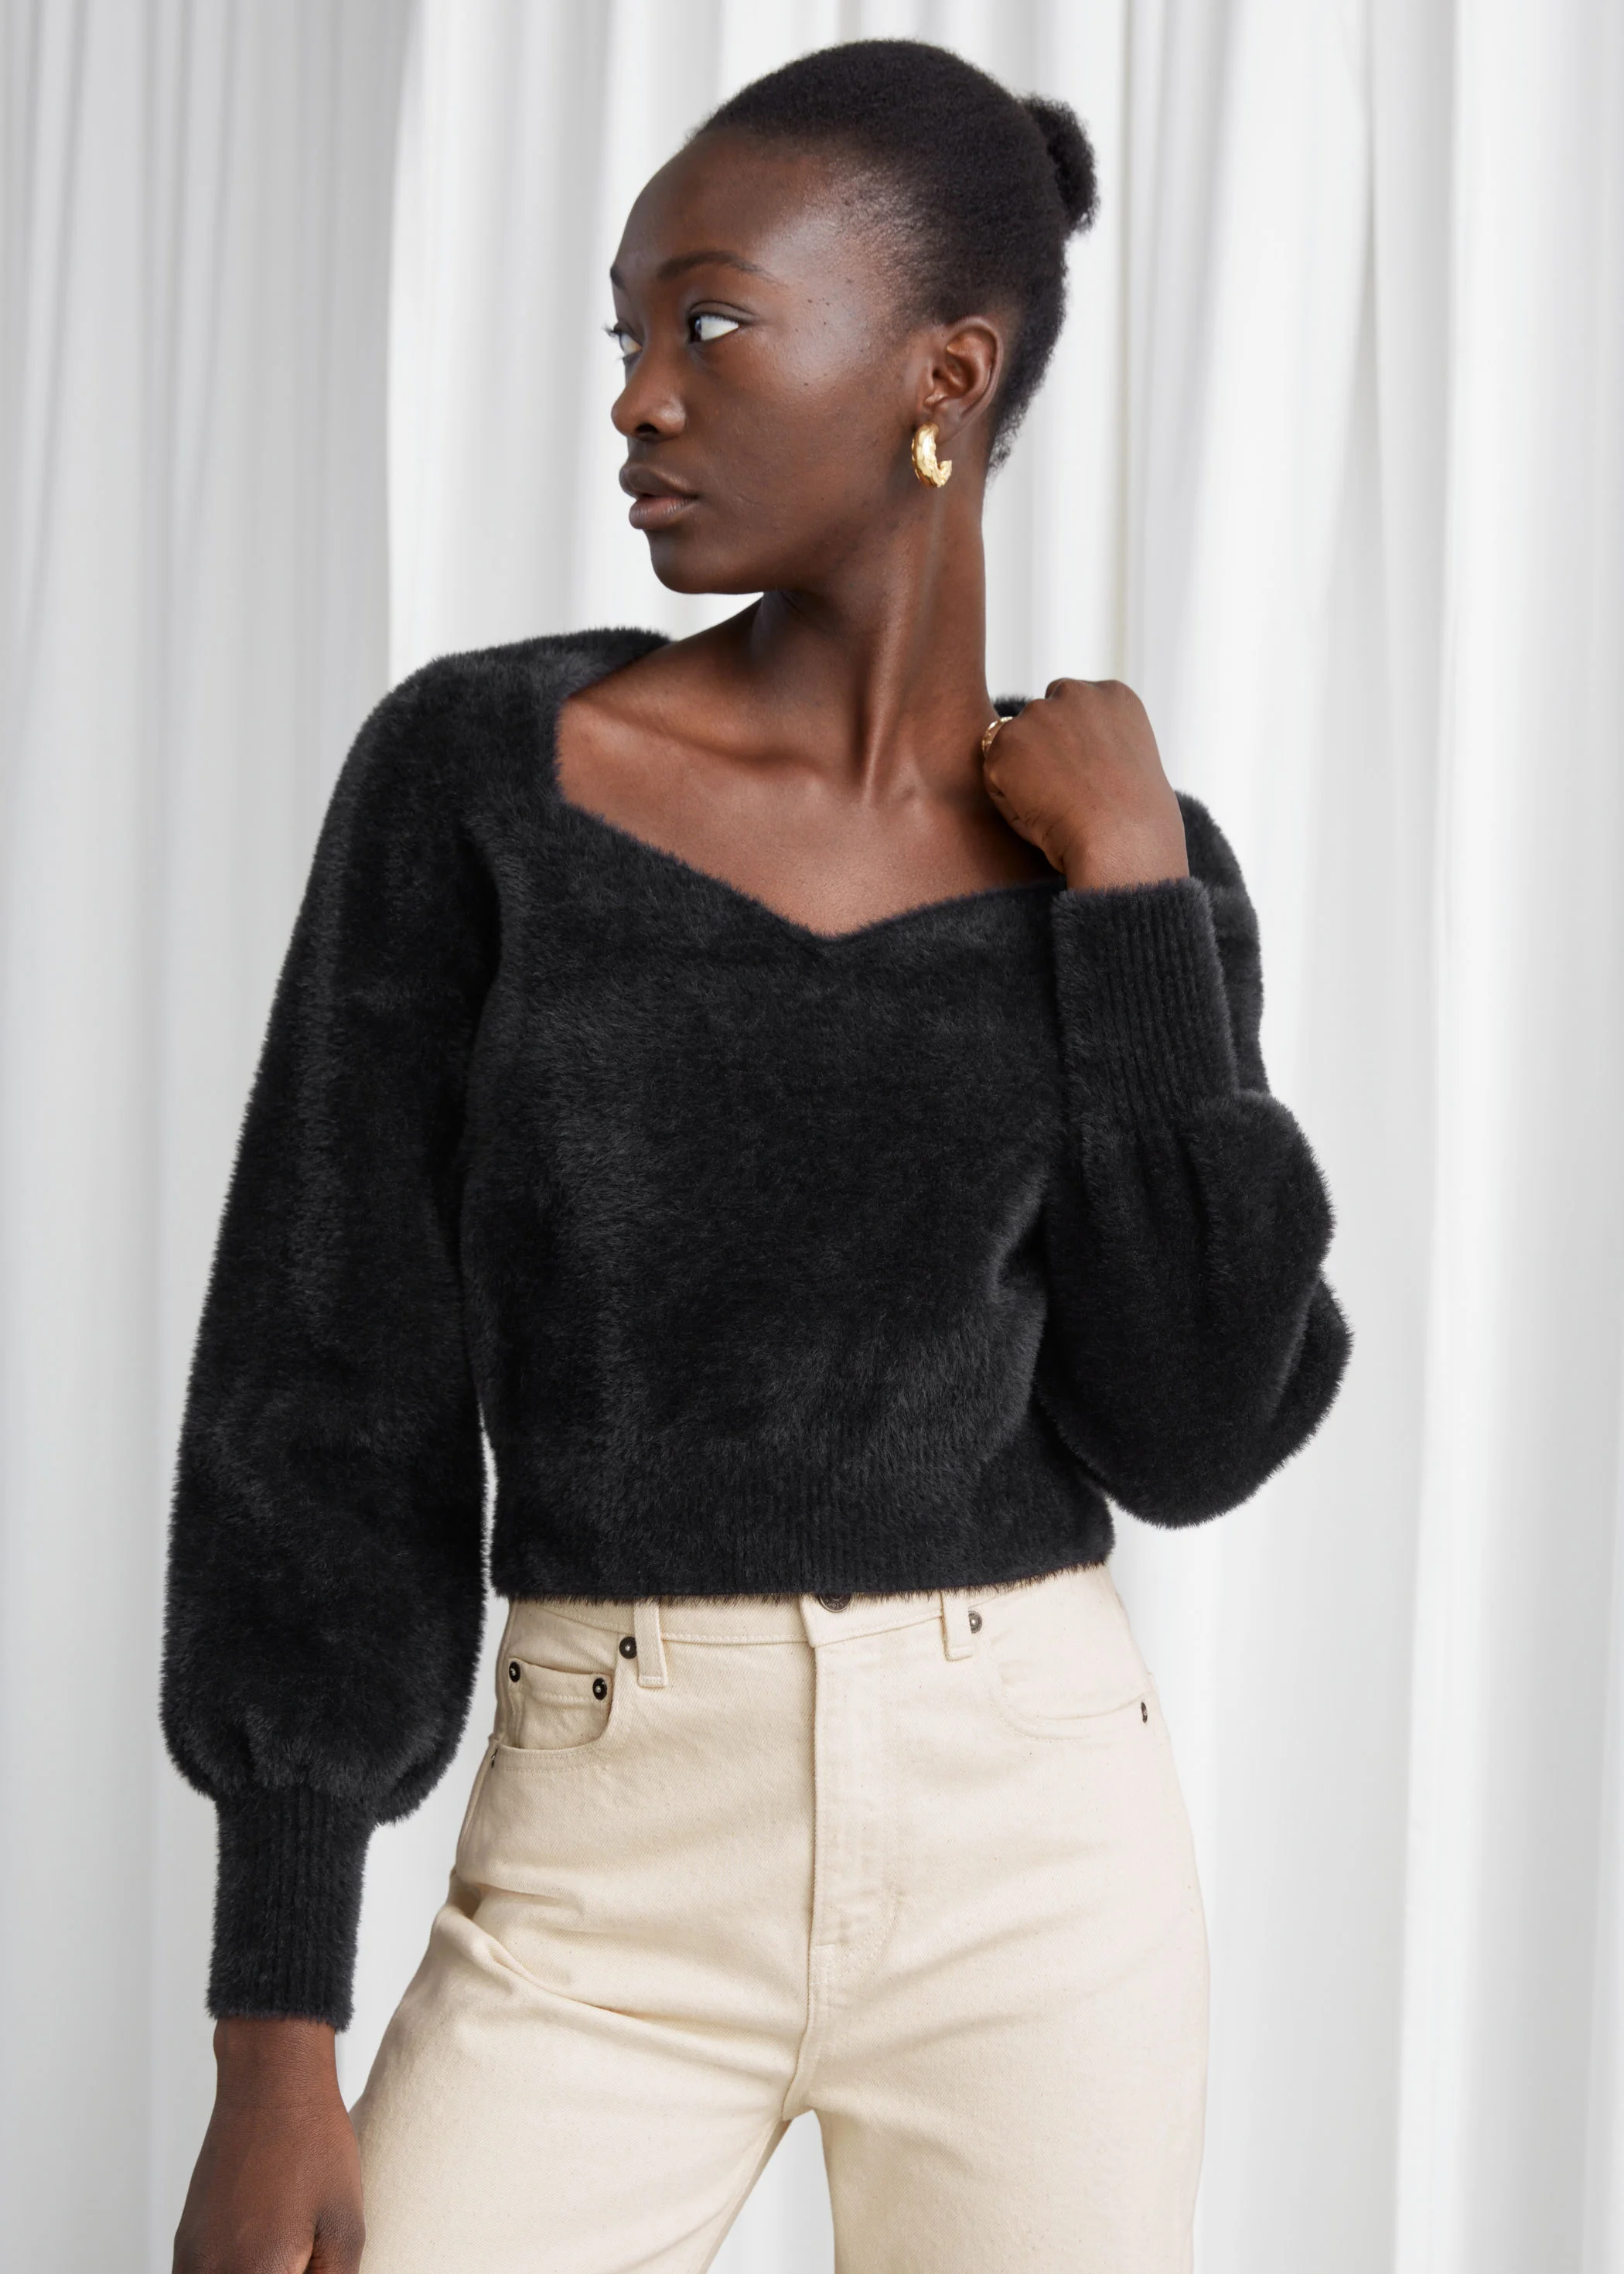 amp; Other Stories + Cropped Sweetheart Neck Sweater